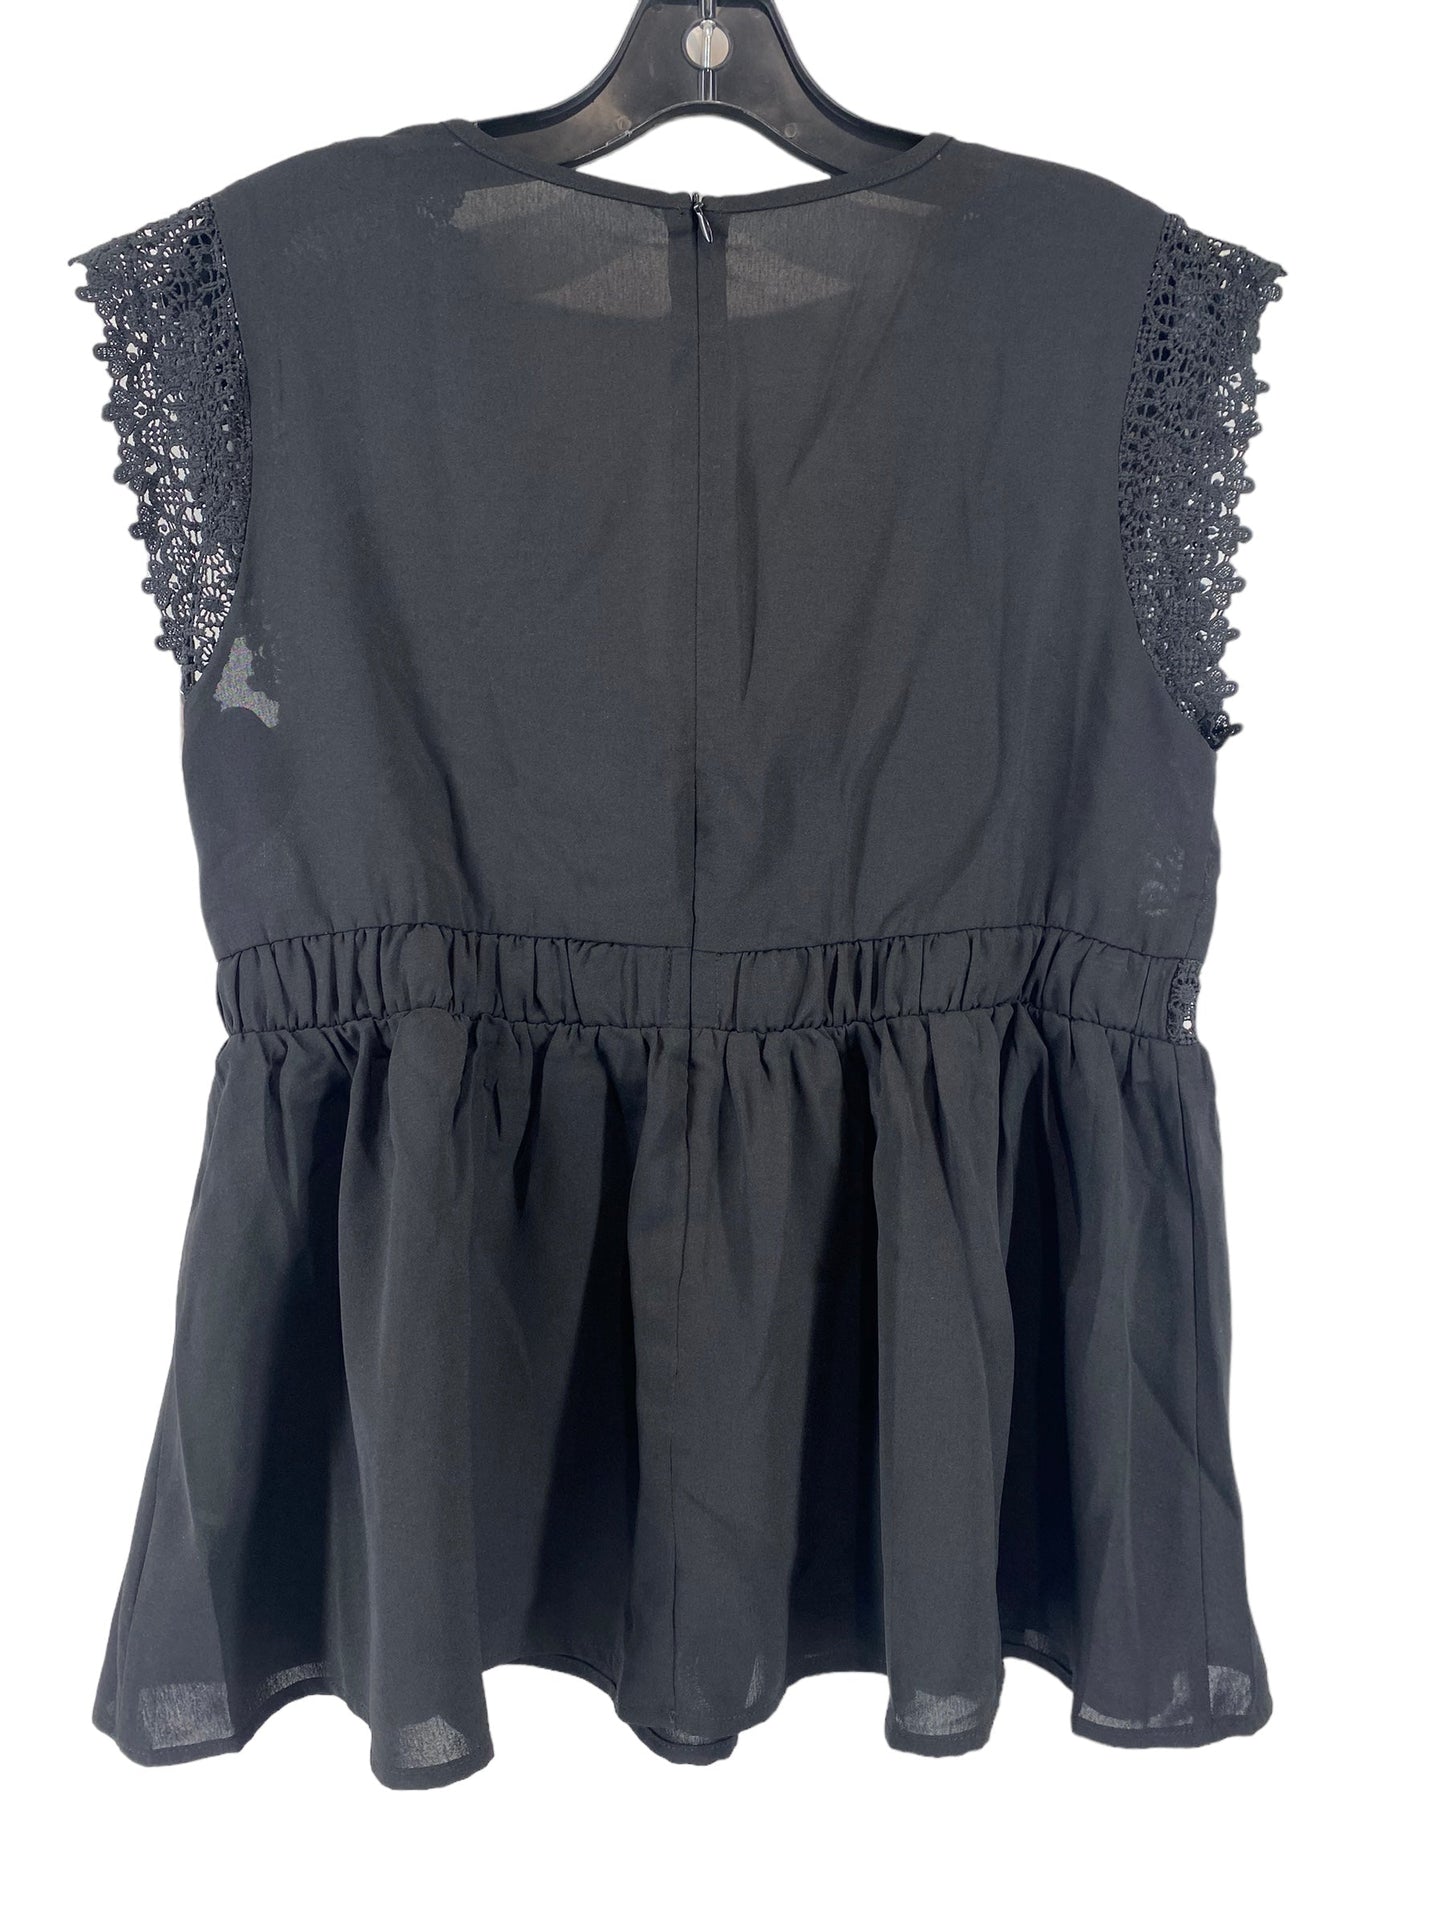 Top Sleeveless By Shein  Size: L